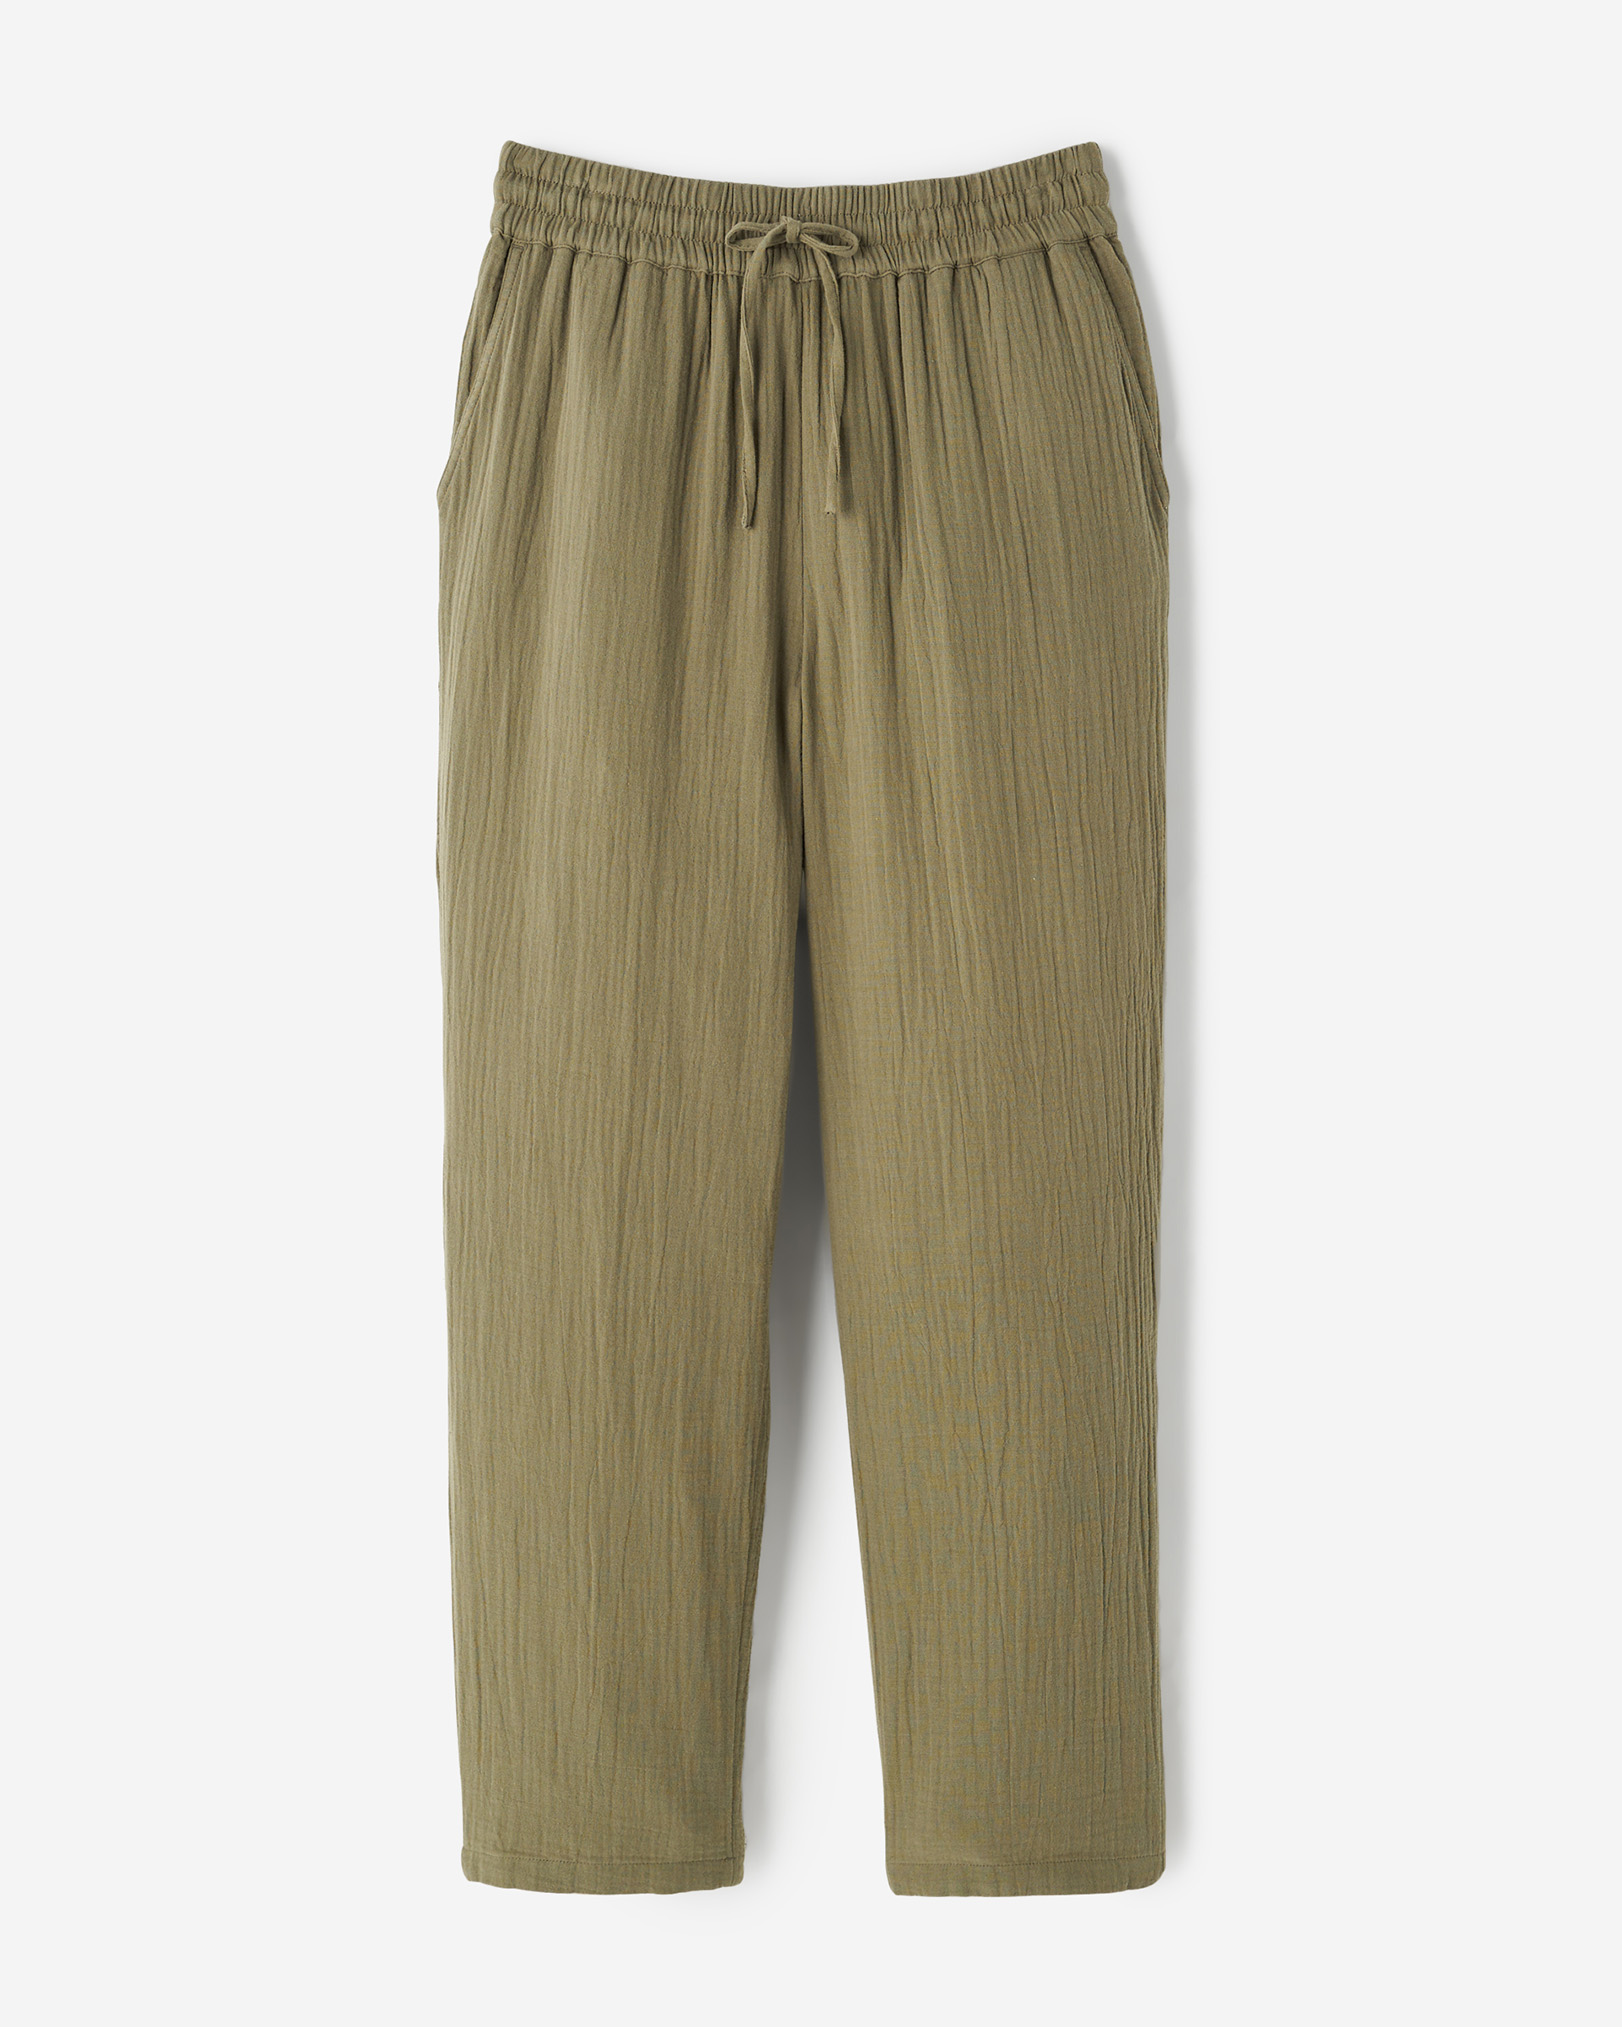 Roots Isla Cotton Gauze Pull On Pant in Deep Lichen Green